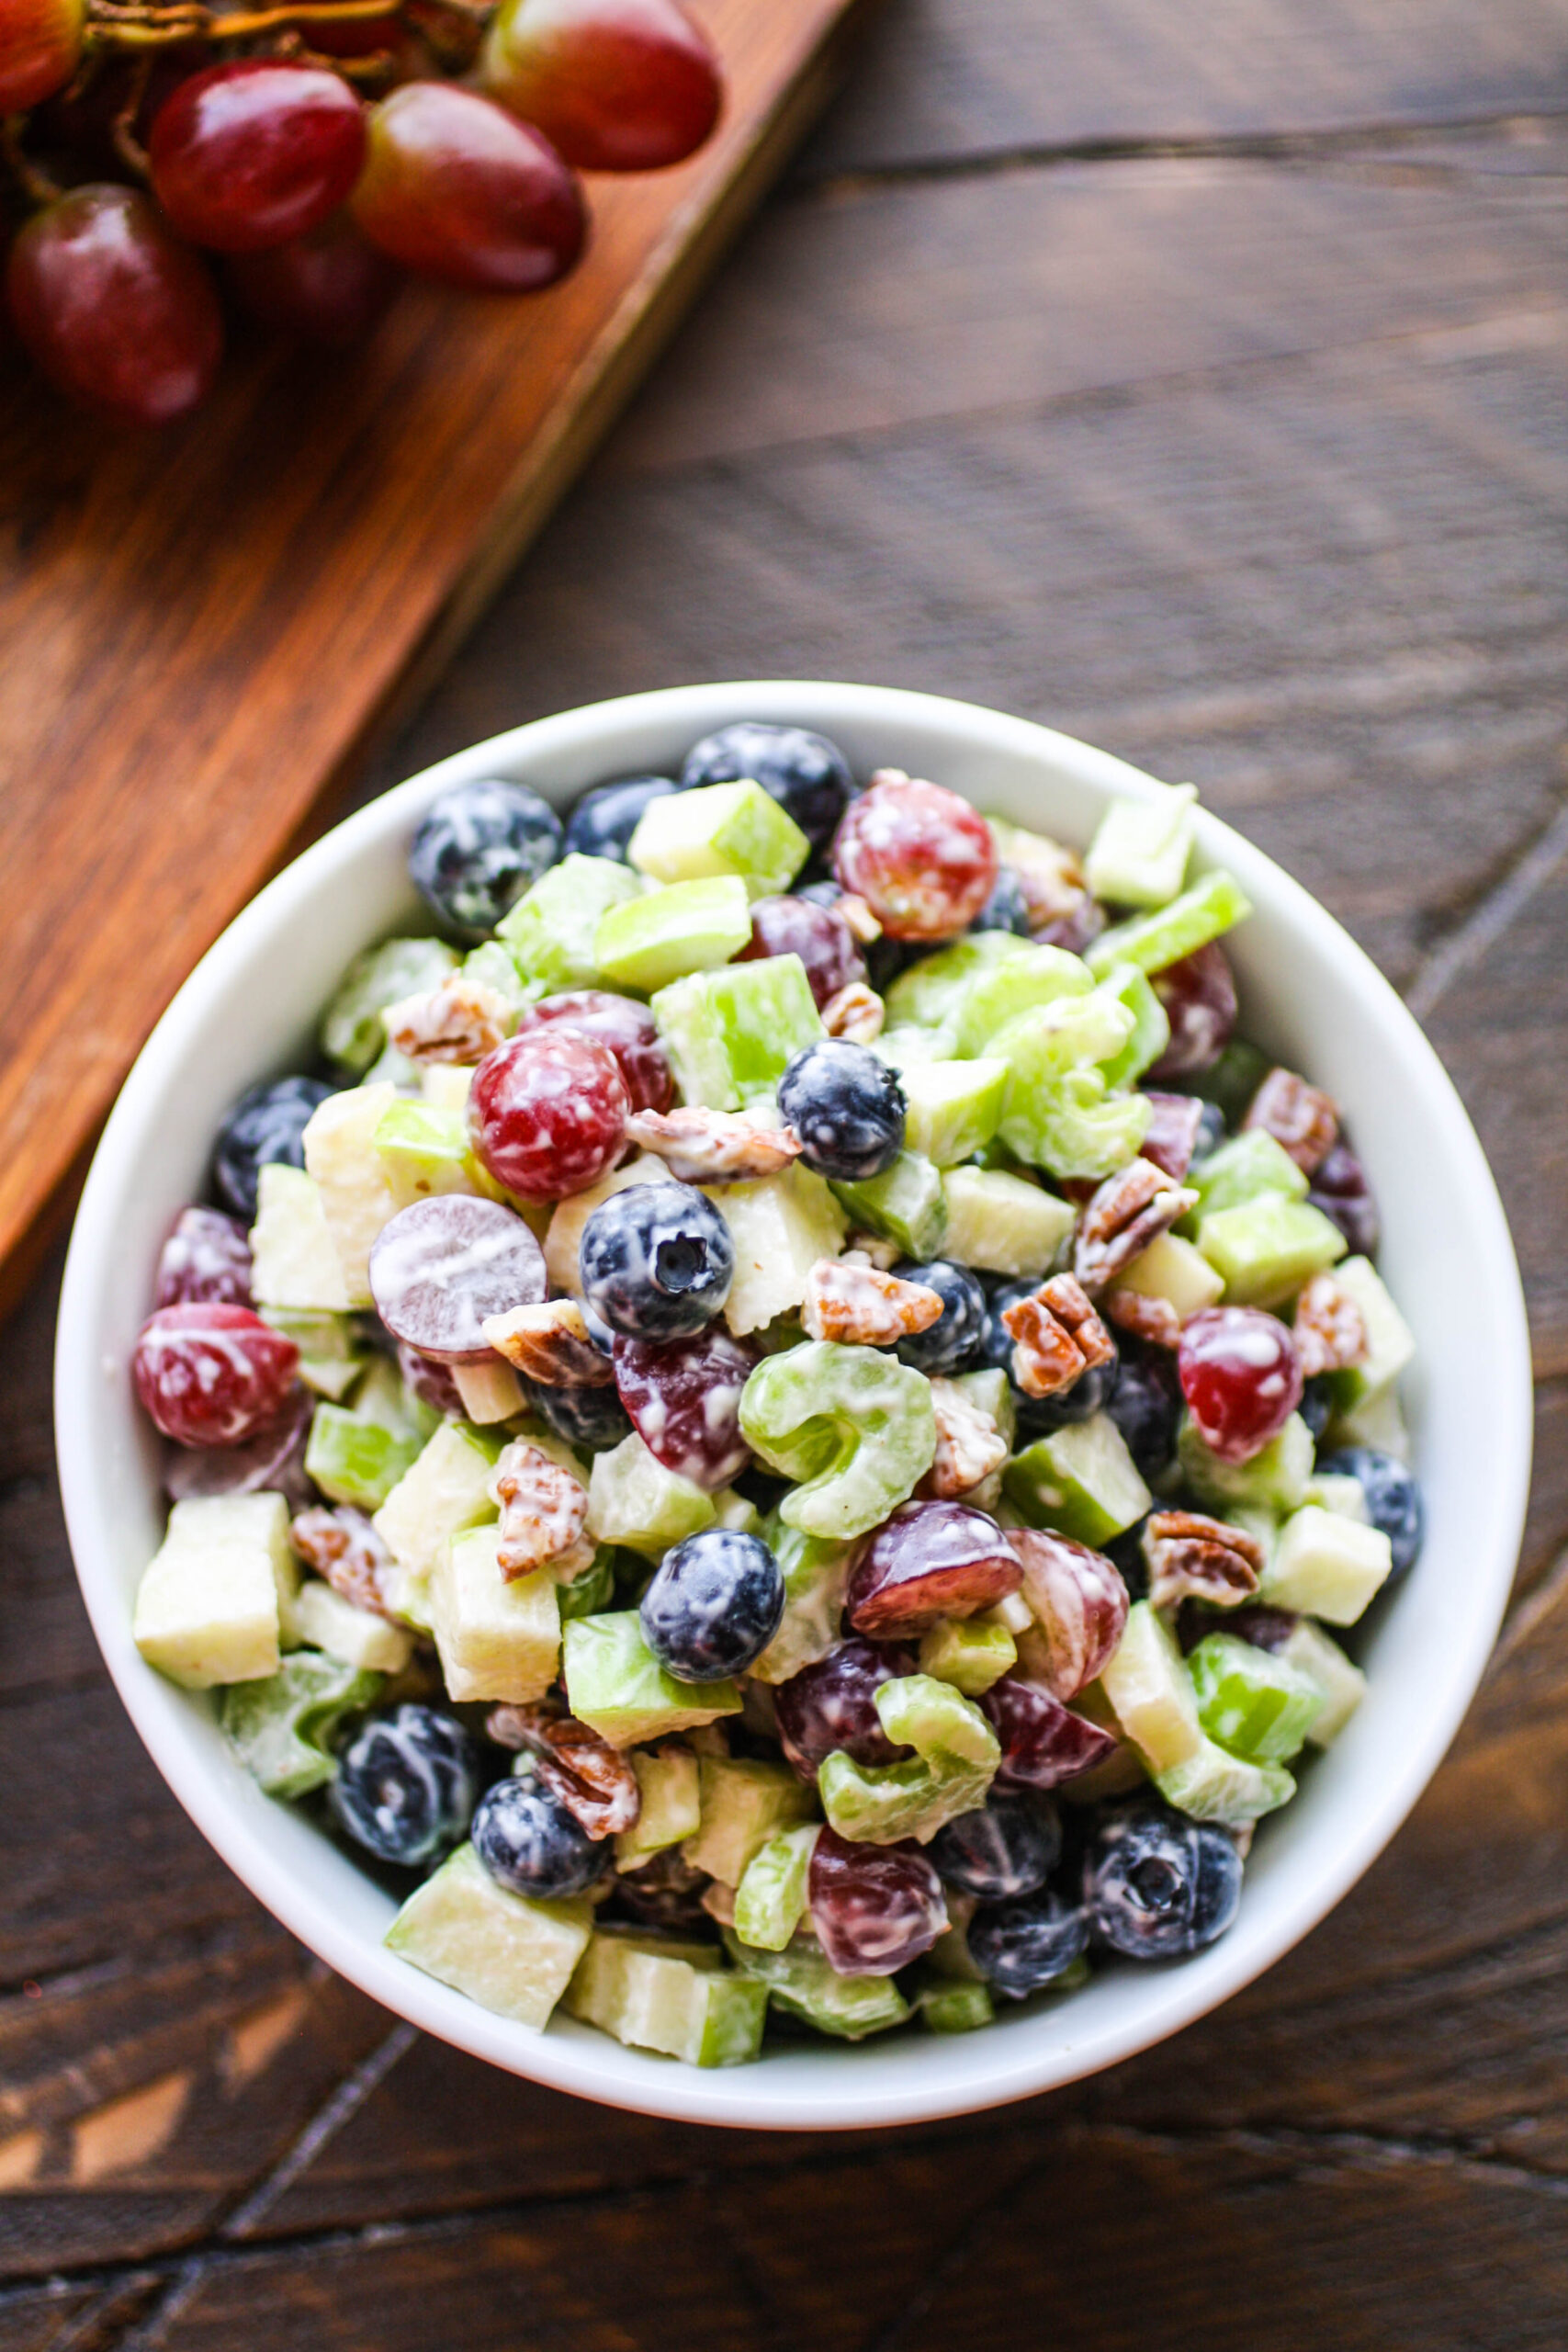 Waldorf salad is a classic for a reason. The crunch and flavor of a Waldorf salad never go out of style!